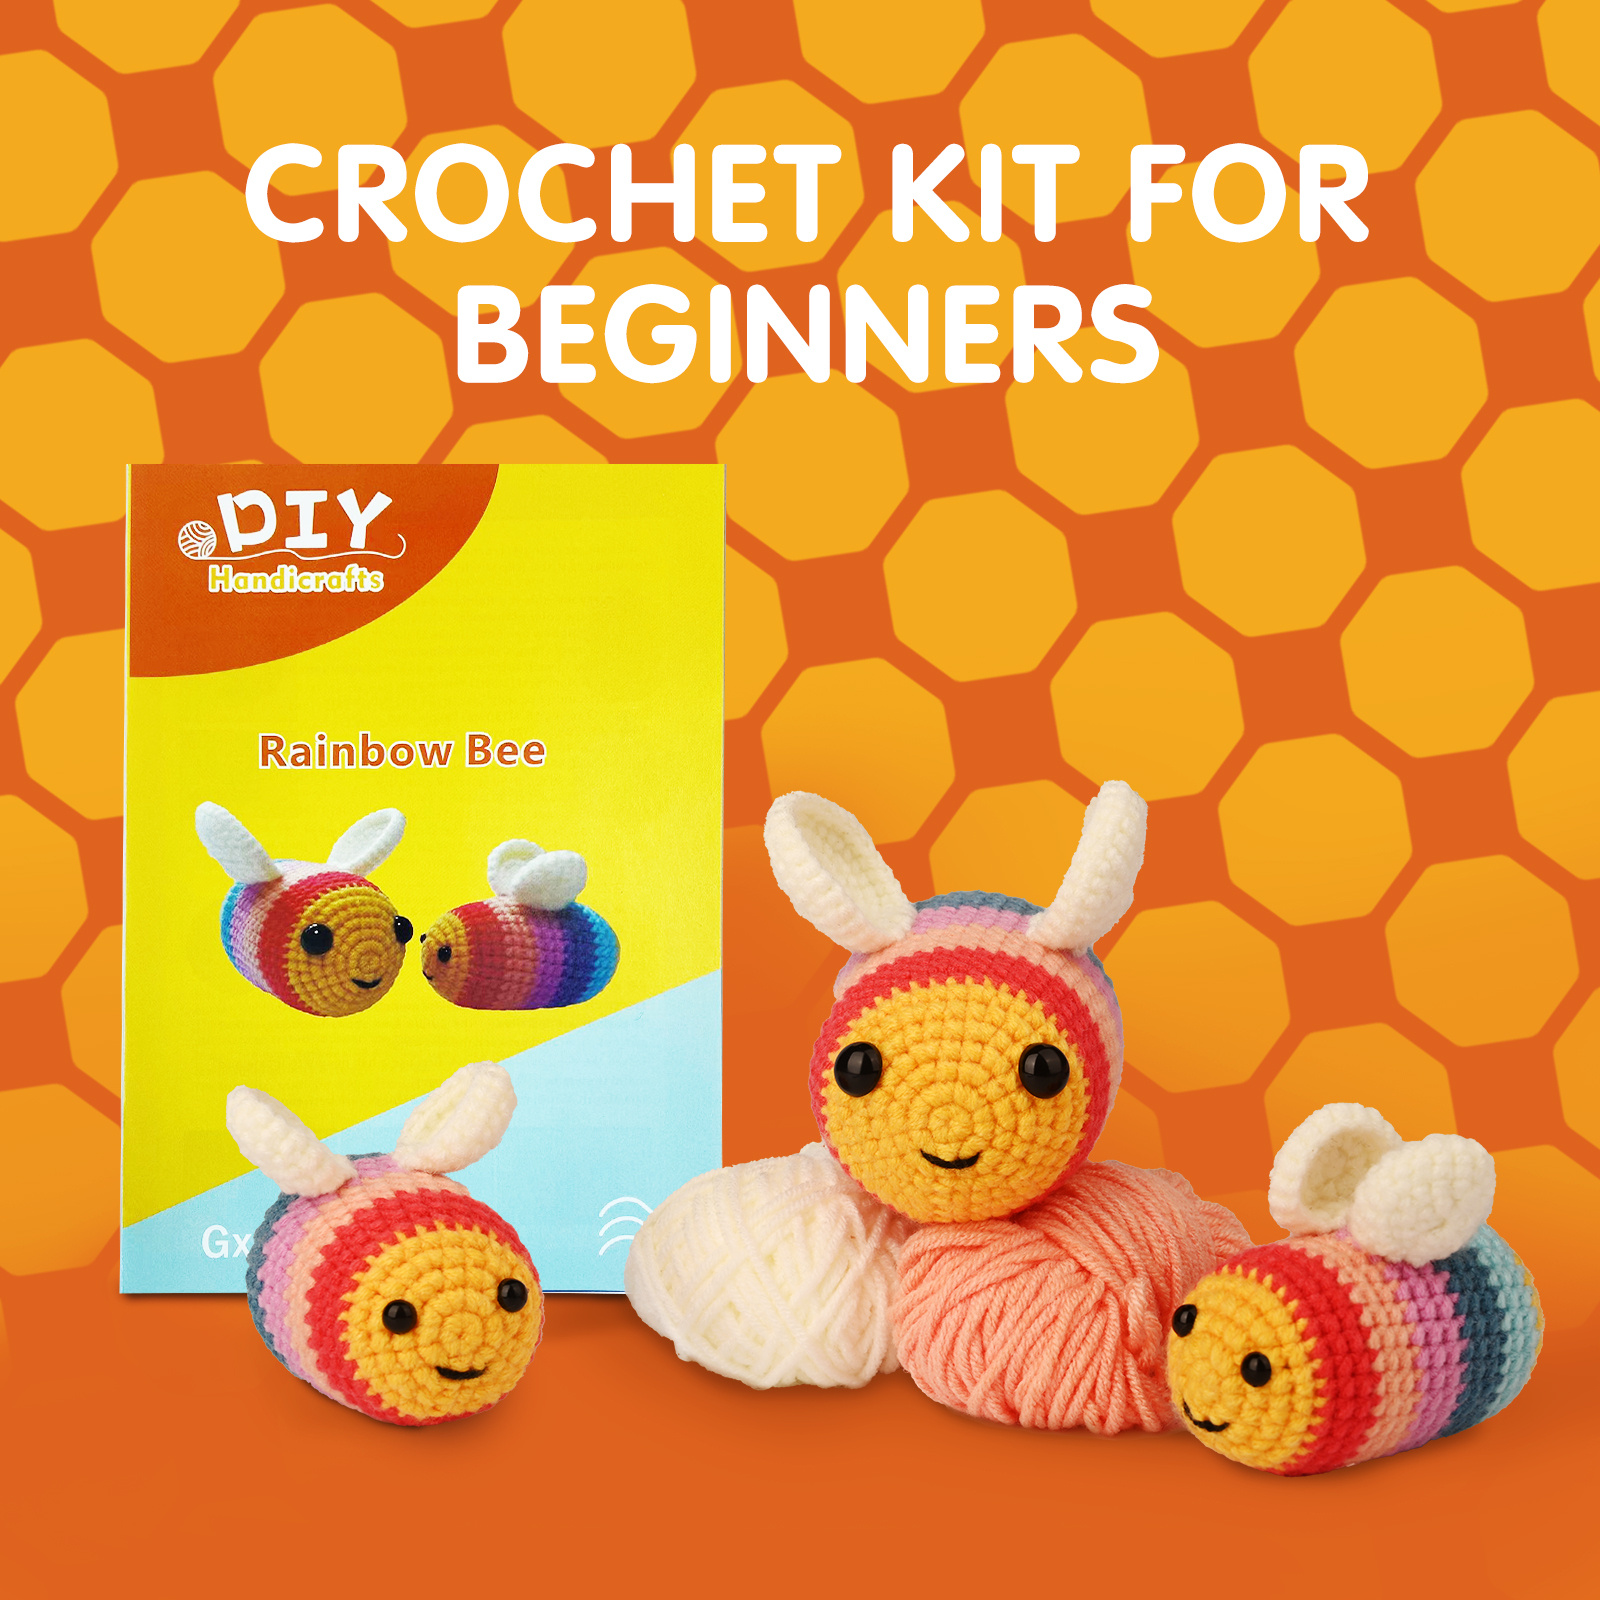 Maziky Beginners Crochet Kit for Adults Cute Bee Crochet Starter Kit with Step-by-Step Video Tutorials Learn to Crochet (1PBees, Gold)